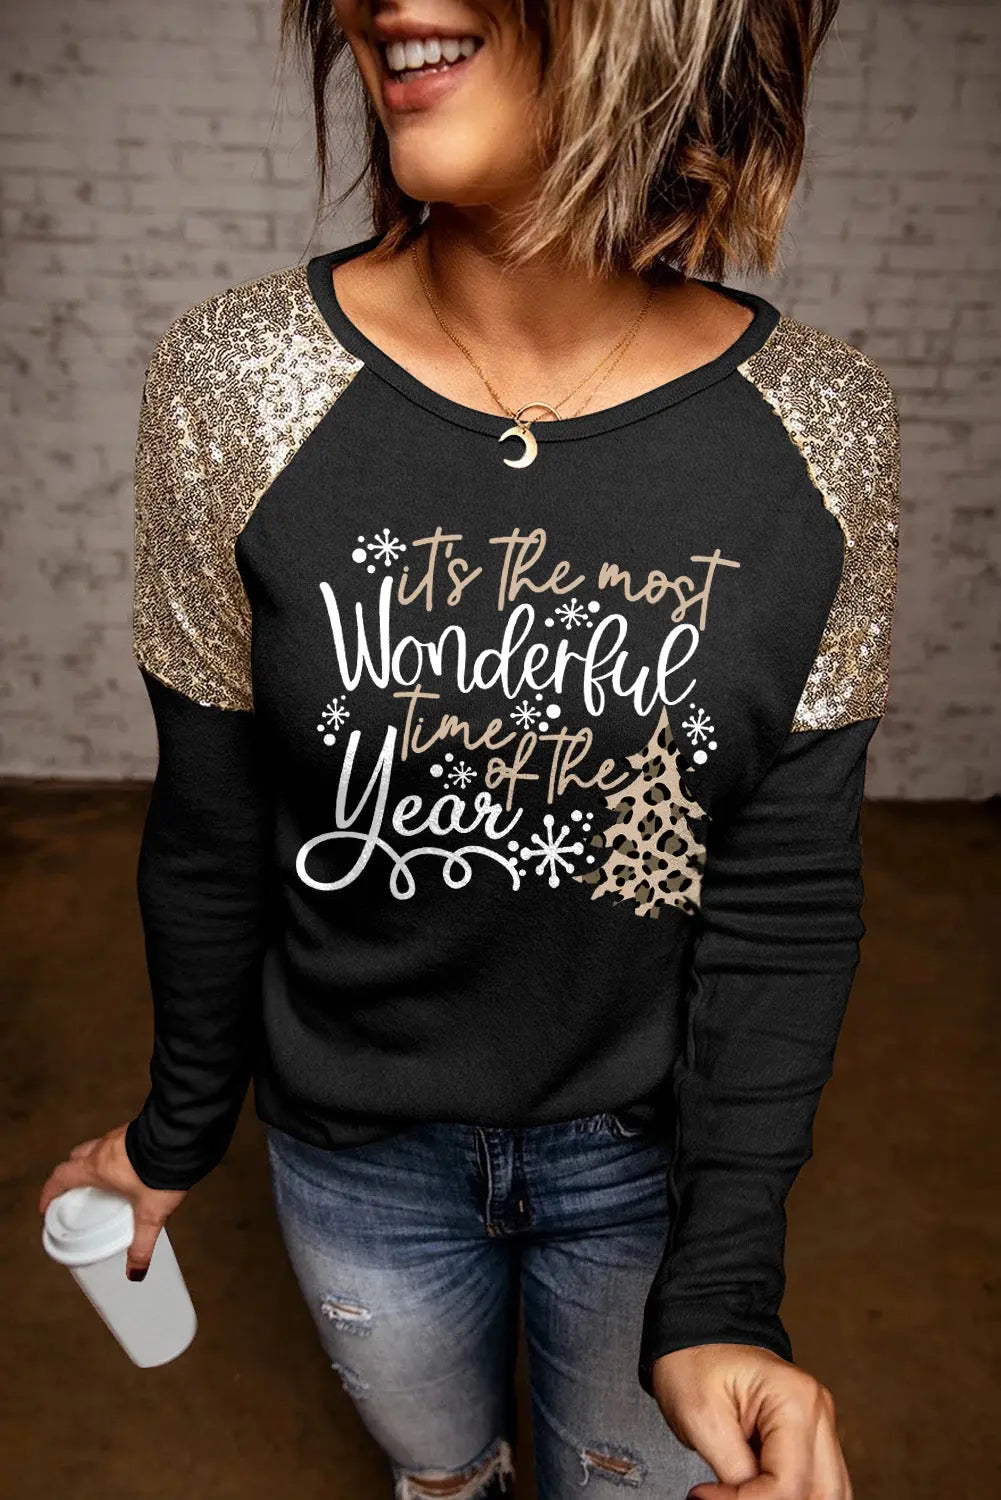 and Gold Sequin Top Clover Print Long Sleeve Shirt